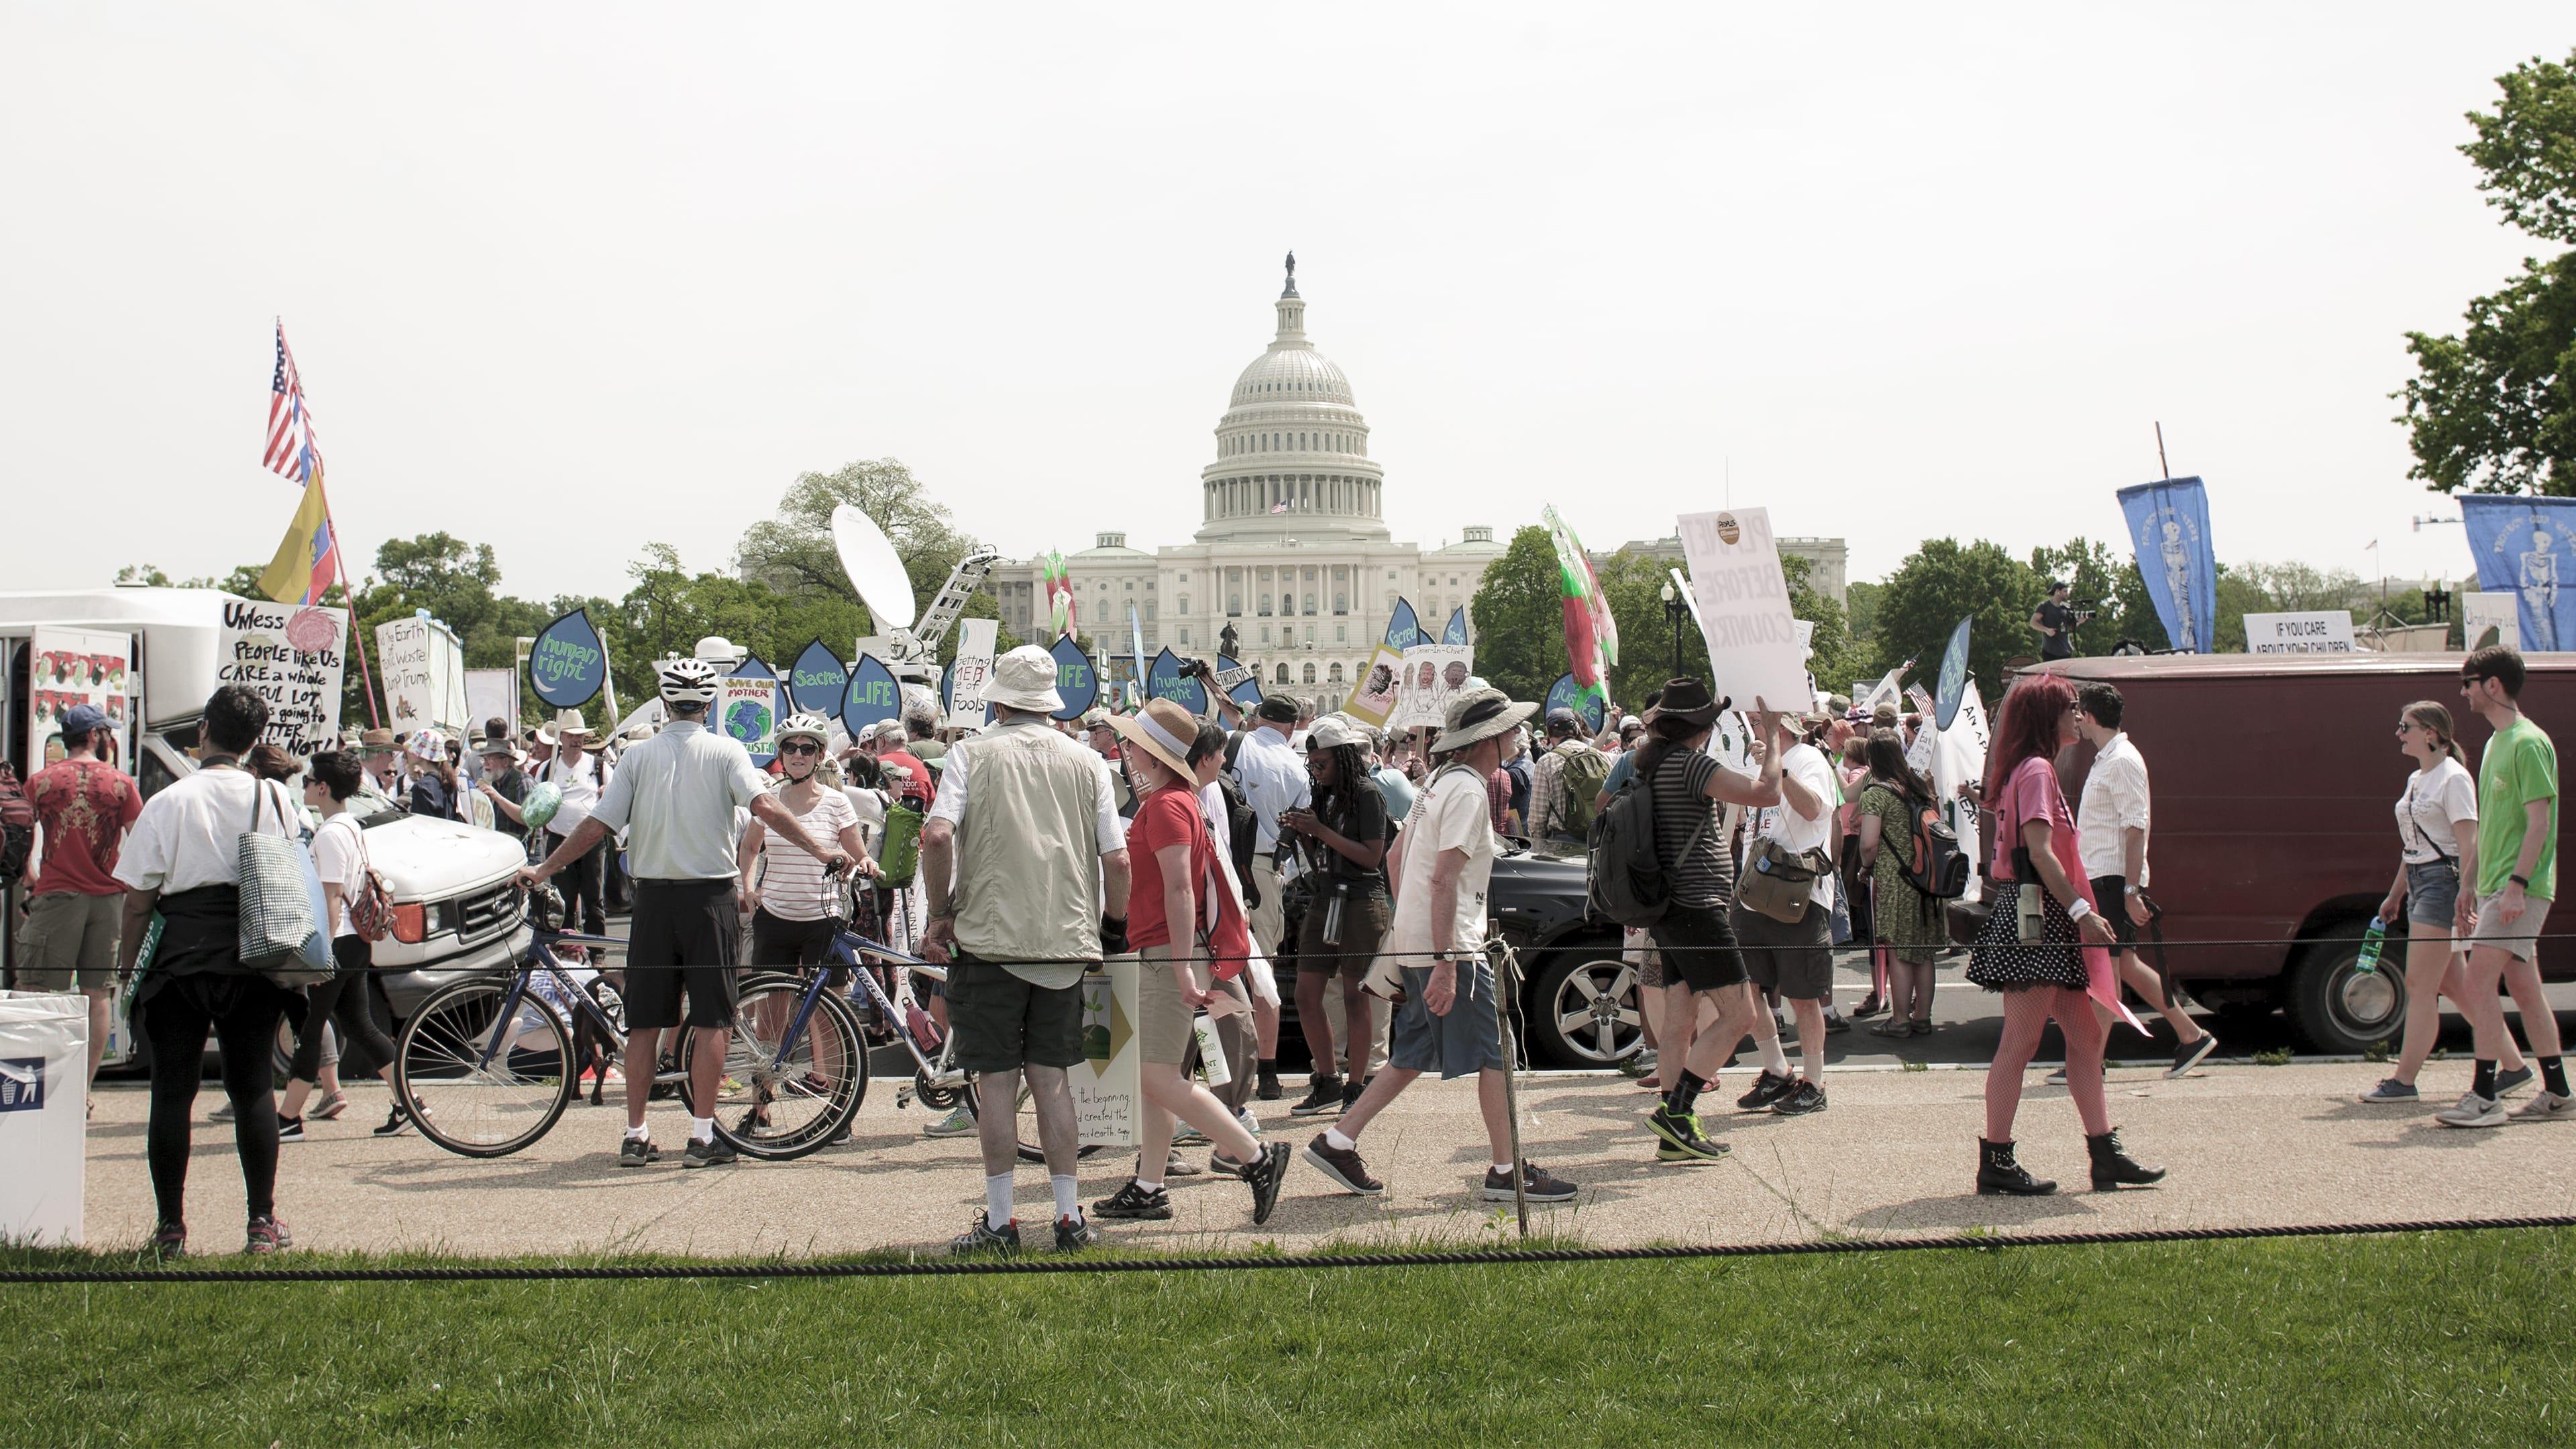 2017 People's Climate March in Washington D.C. backdrop